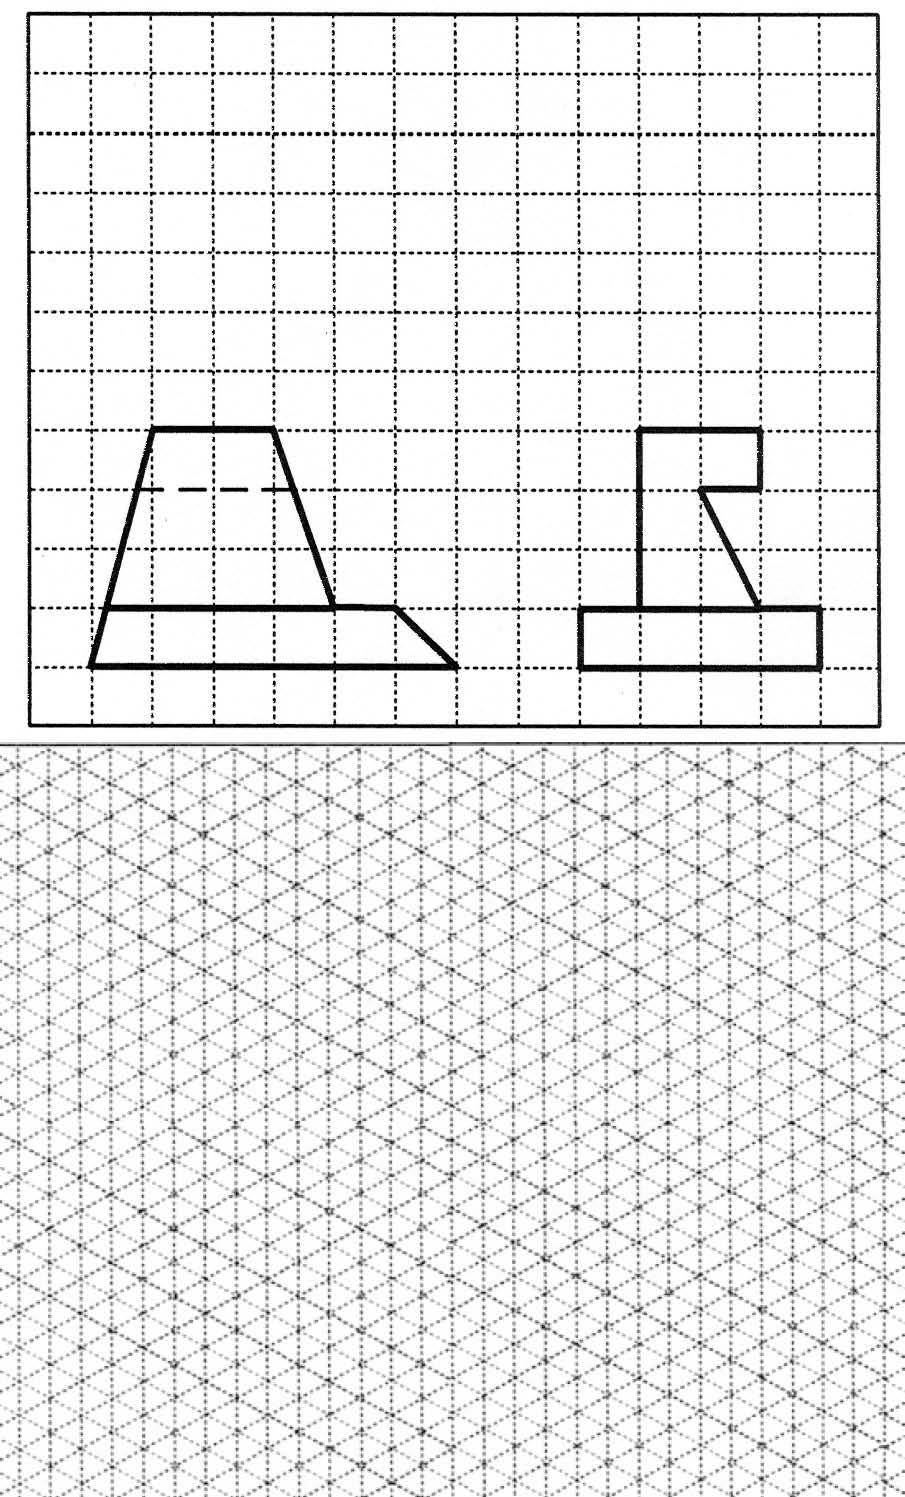 (b) Two views of a multiview drawing of an object are given in figure 3.